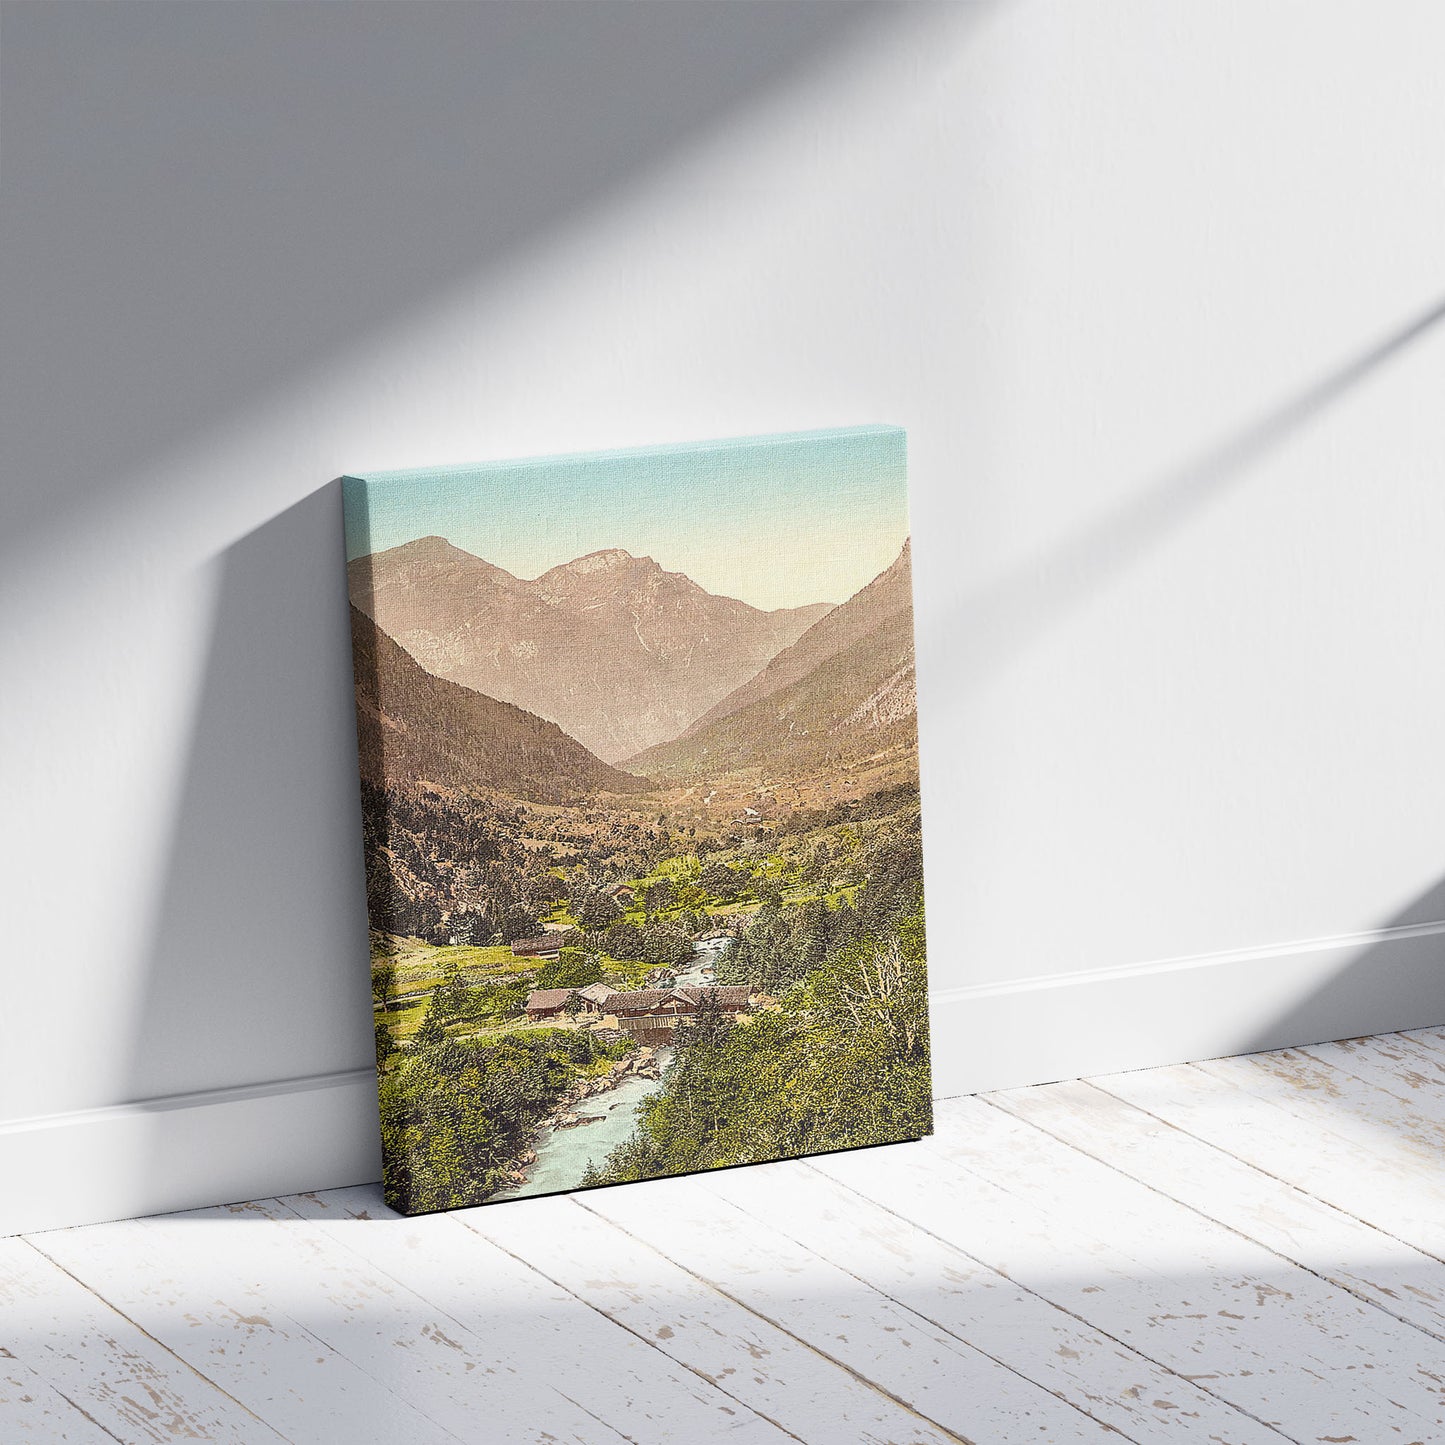 A picture of Grindelwald, road from Zwiellutschine, Bernese Oberland, Switzerland, a mockup of the print leaning against a wall